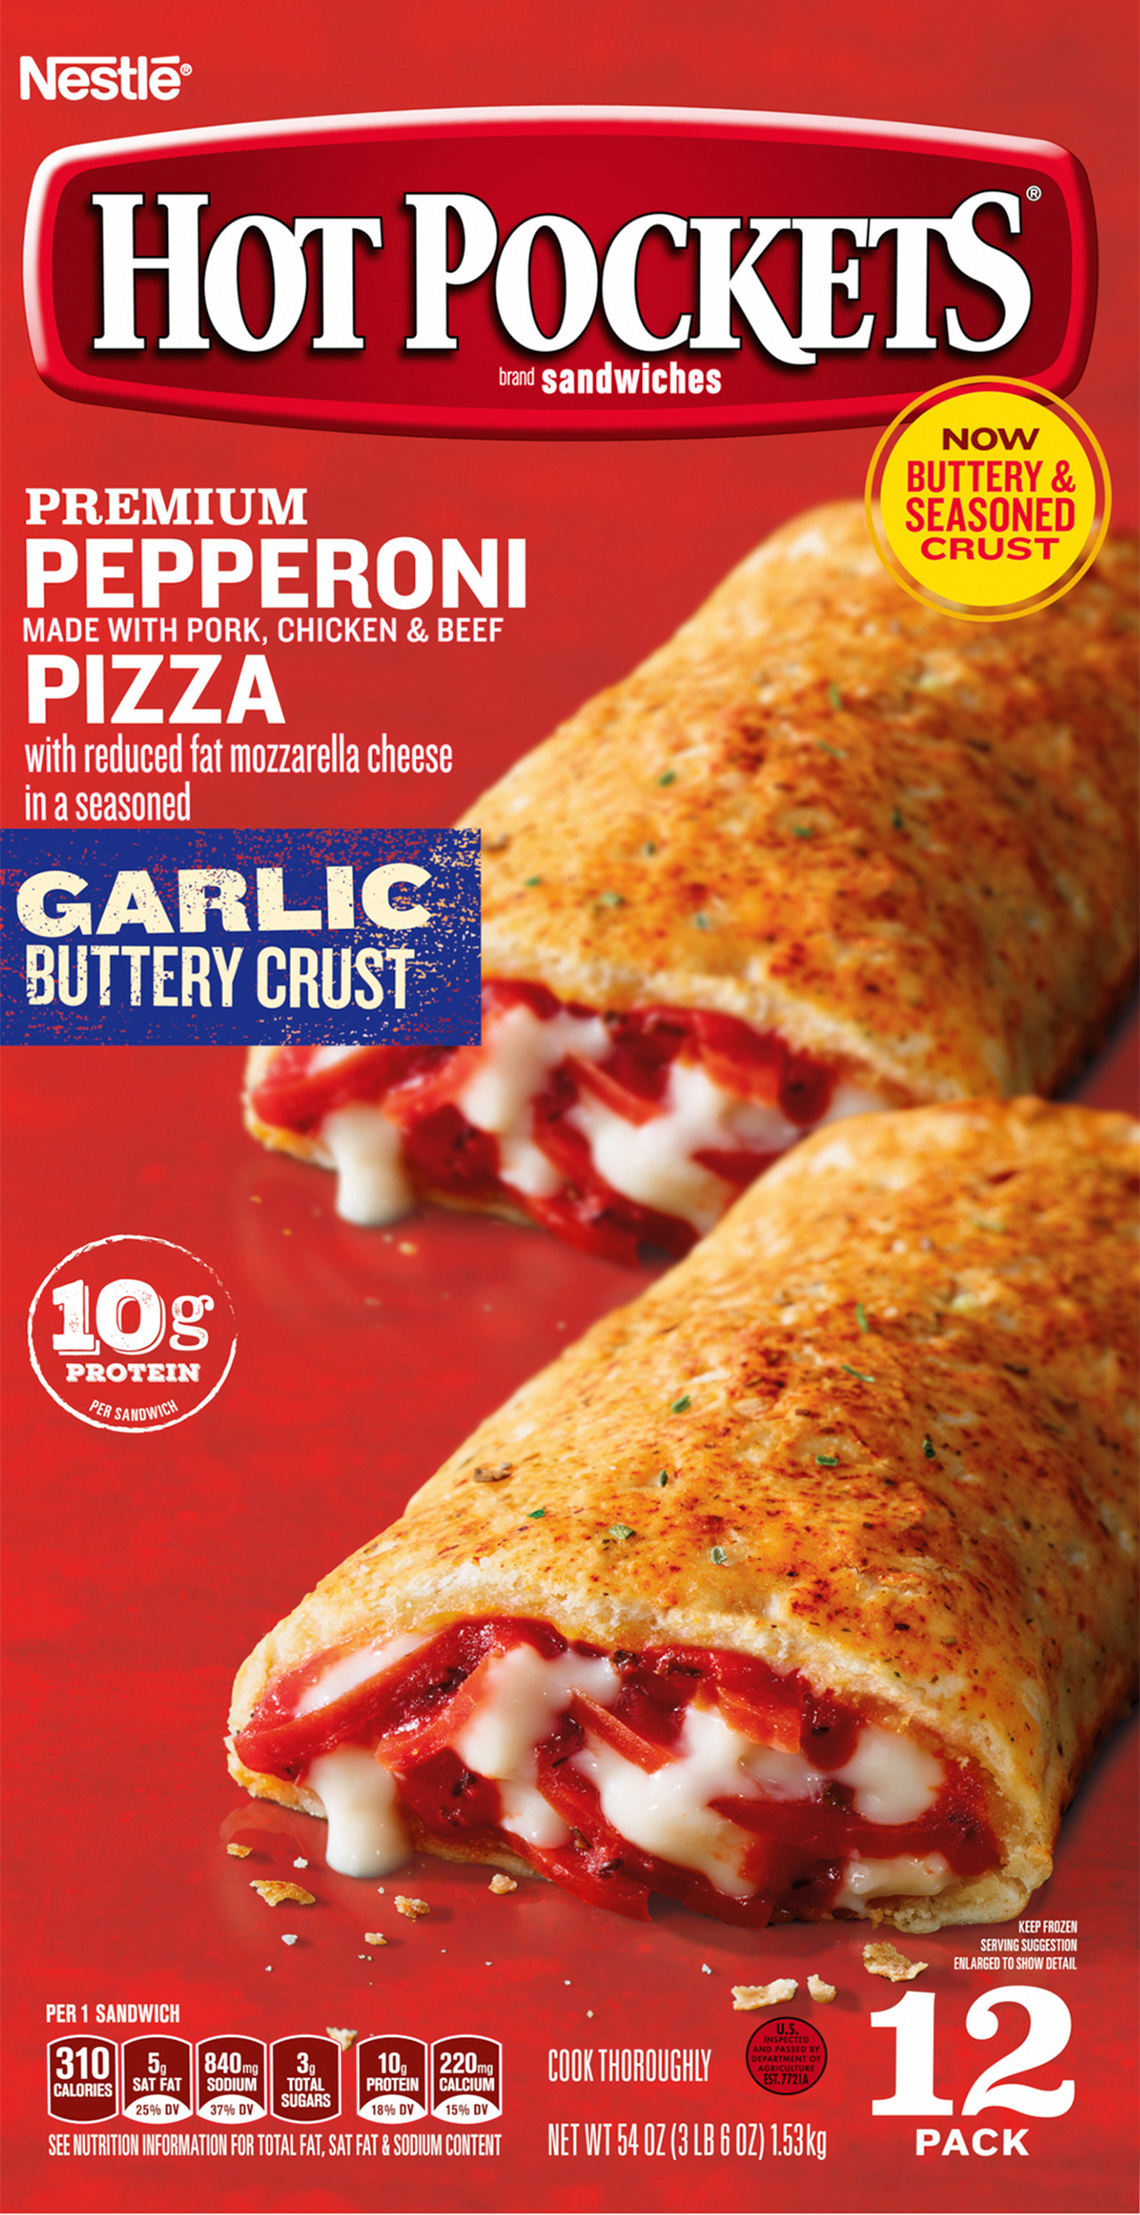 Cover of a Hot Pockets package